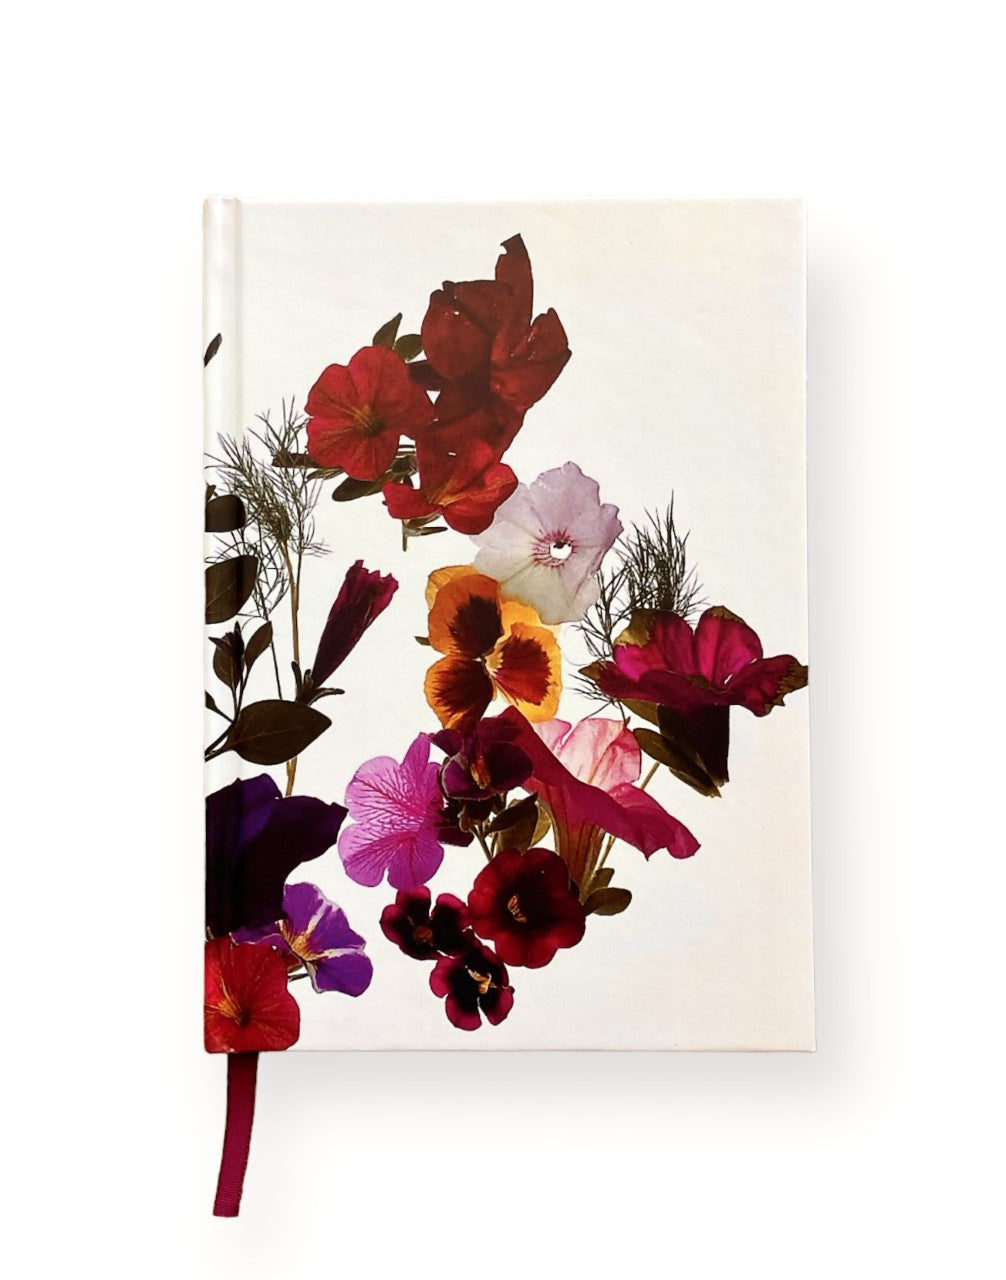 floralis, maz ghani, wildflowers, hardcover journal, journal, book, write, luxury gifts, gifts, shop, colorful, flowers, botanical